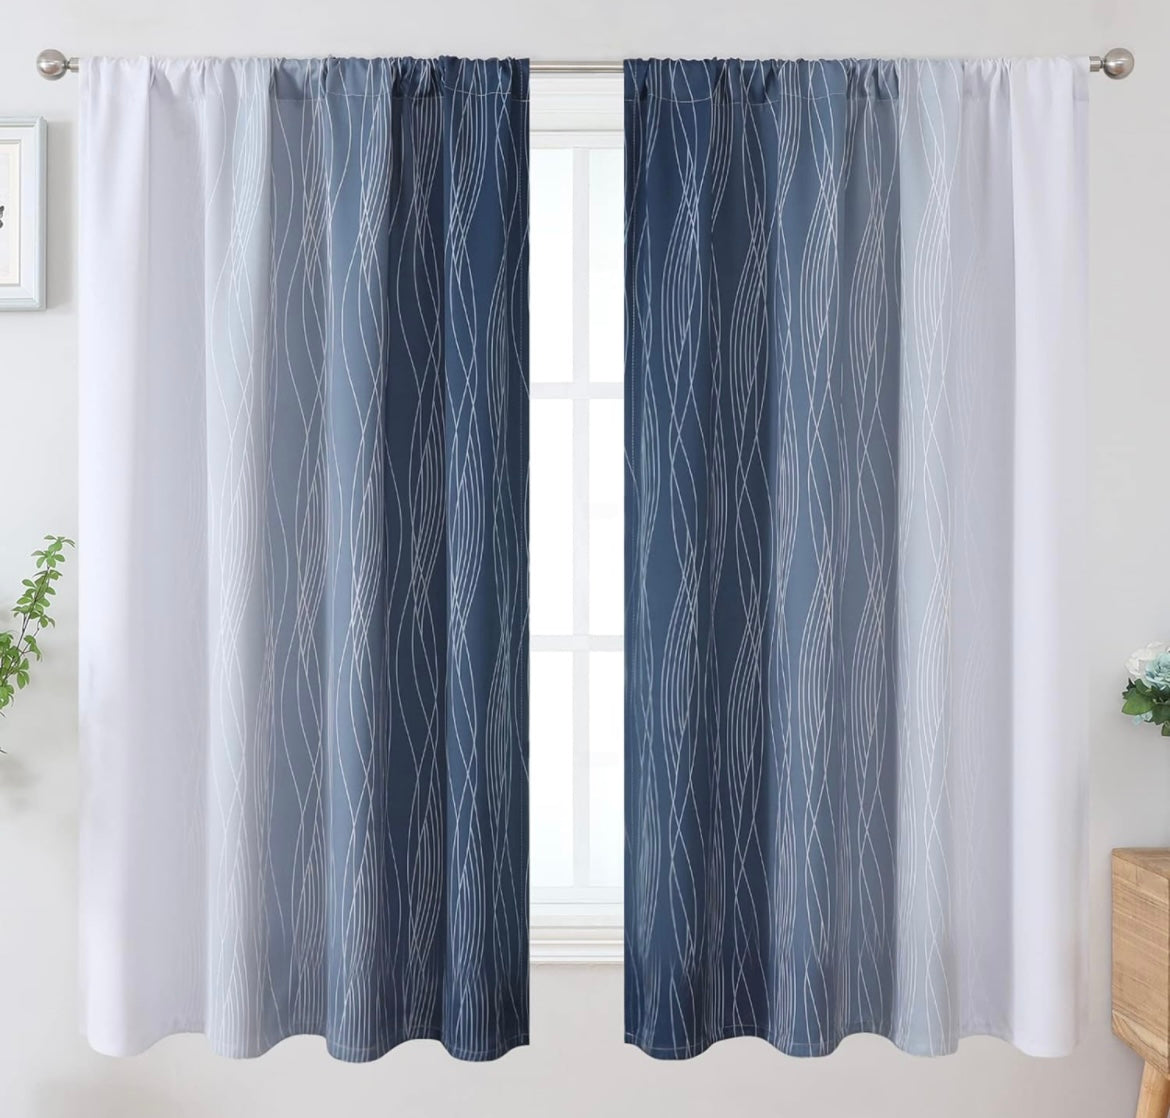 Estelar Textiler Rod Pocket Navy Blue and White Blackout Curtains 63 Inches Long, Full Light Blocking Window Curtains for Bedroom, Thermal Insulated Room Darkening Drapes,52x63 Inch, 2 Panels